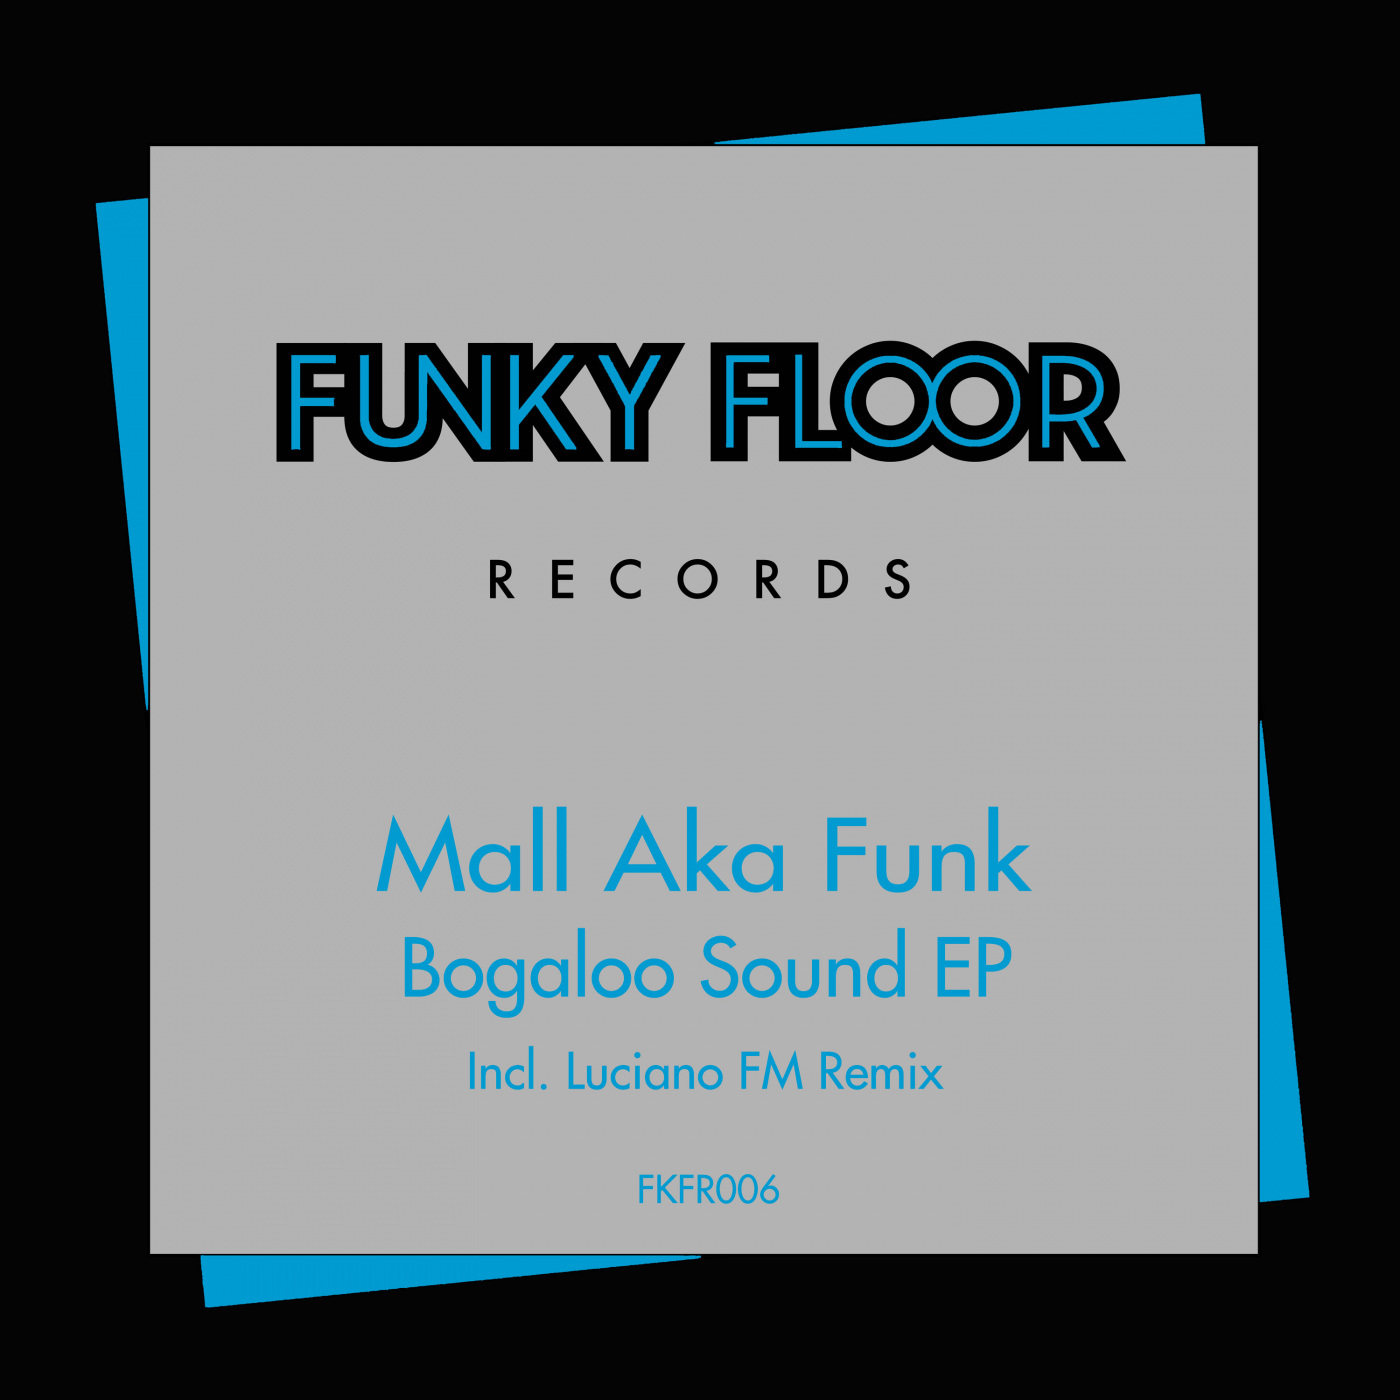 Mall Aka Funk - Bogaloo Sound EP / Funky Floor Records